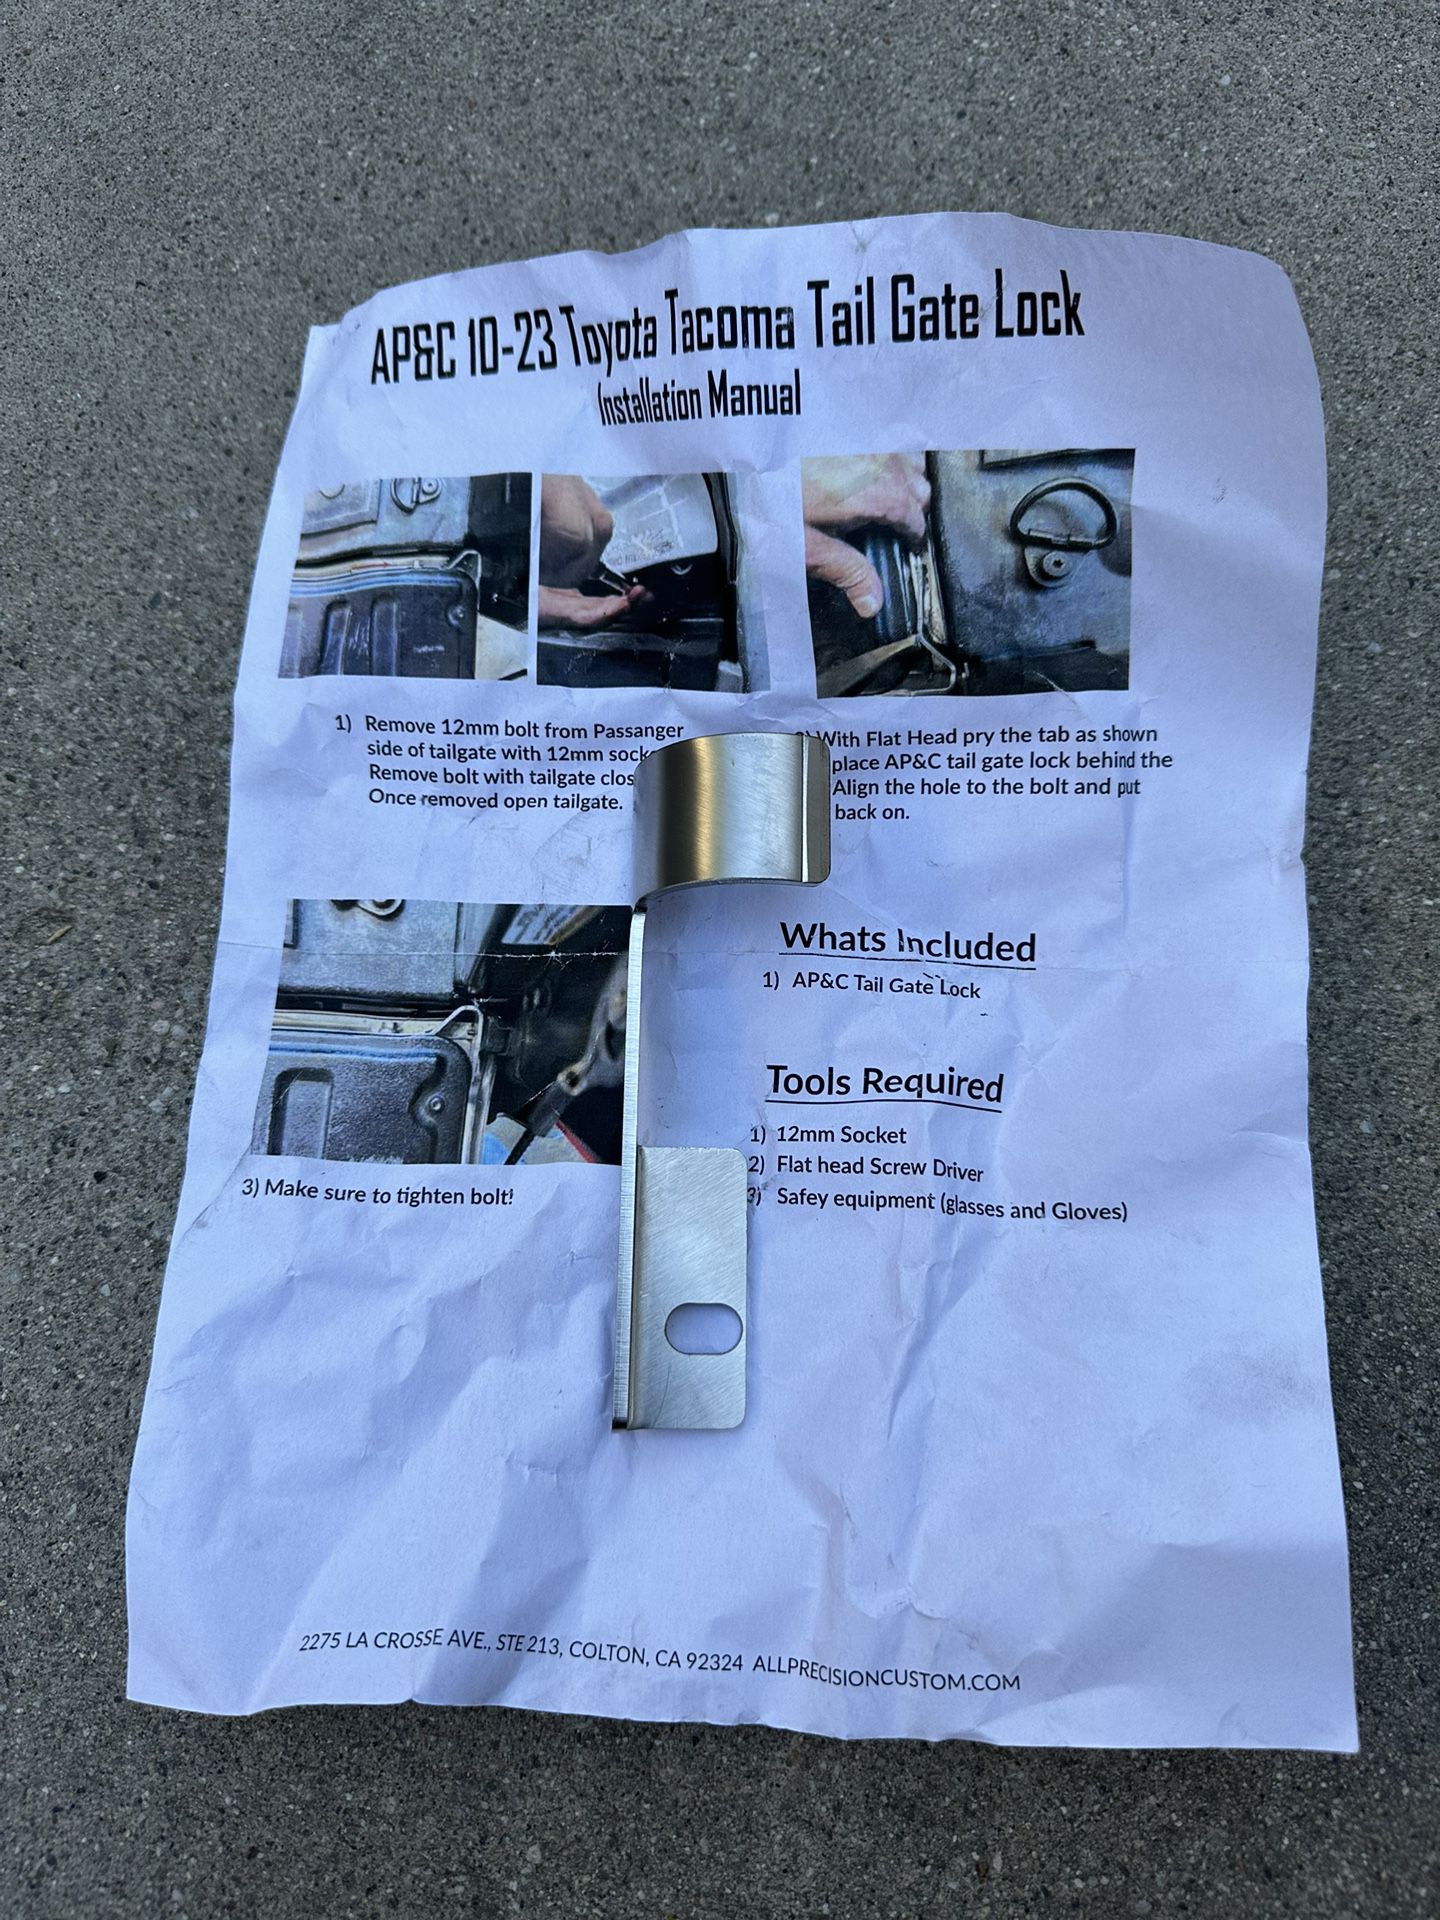 16-23 Toyota Tacoma Tailgate Custom Lock excellent condition 